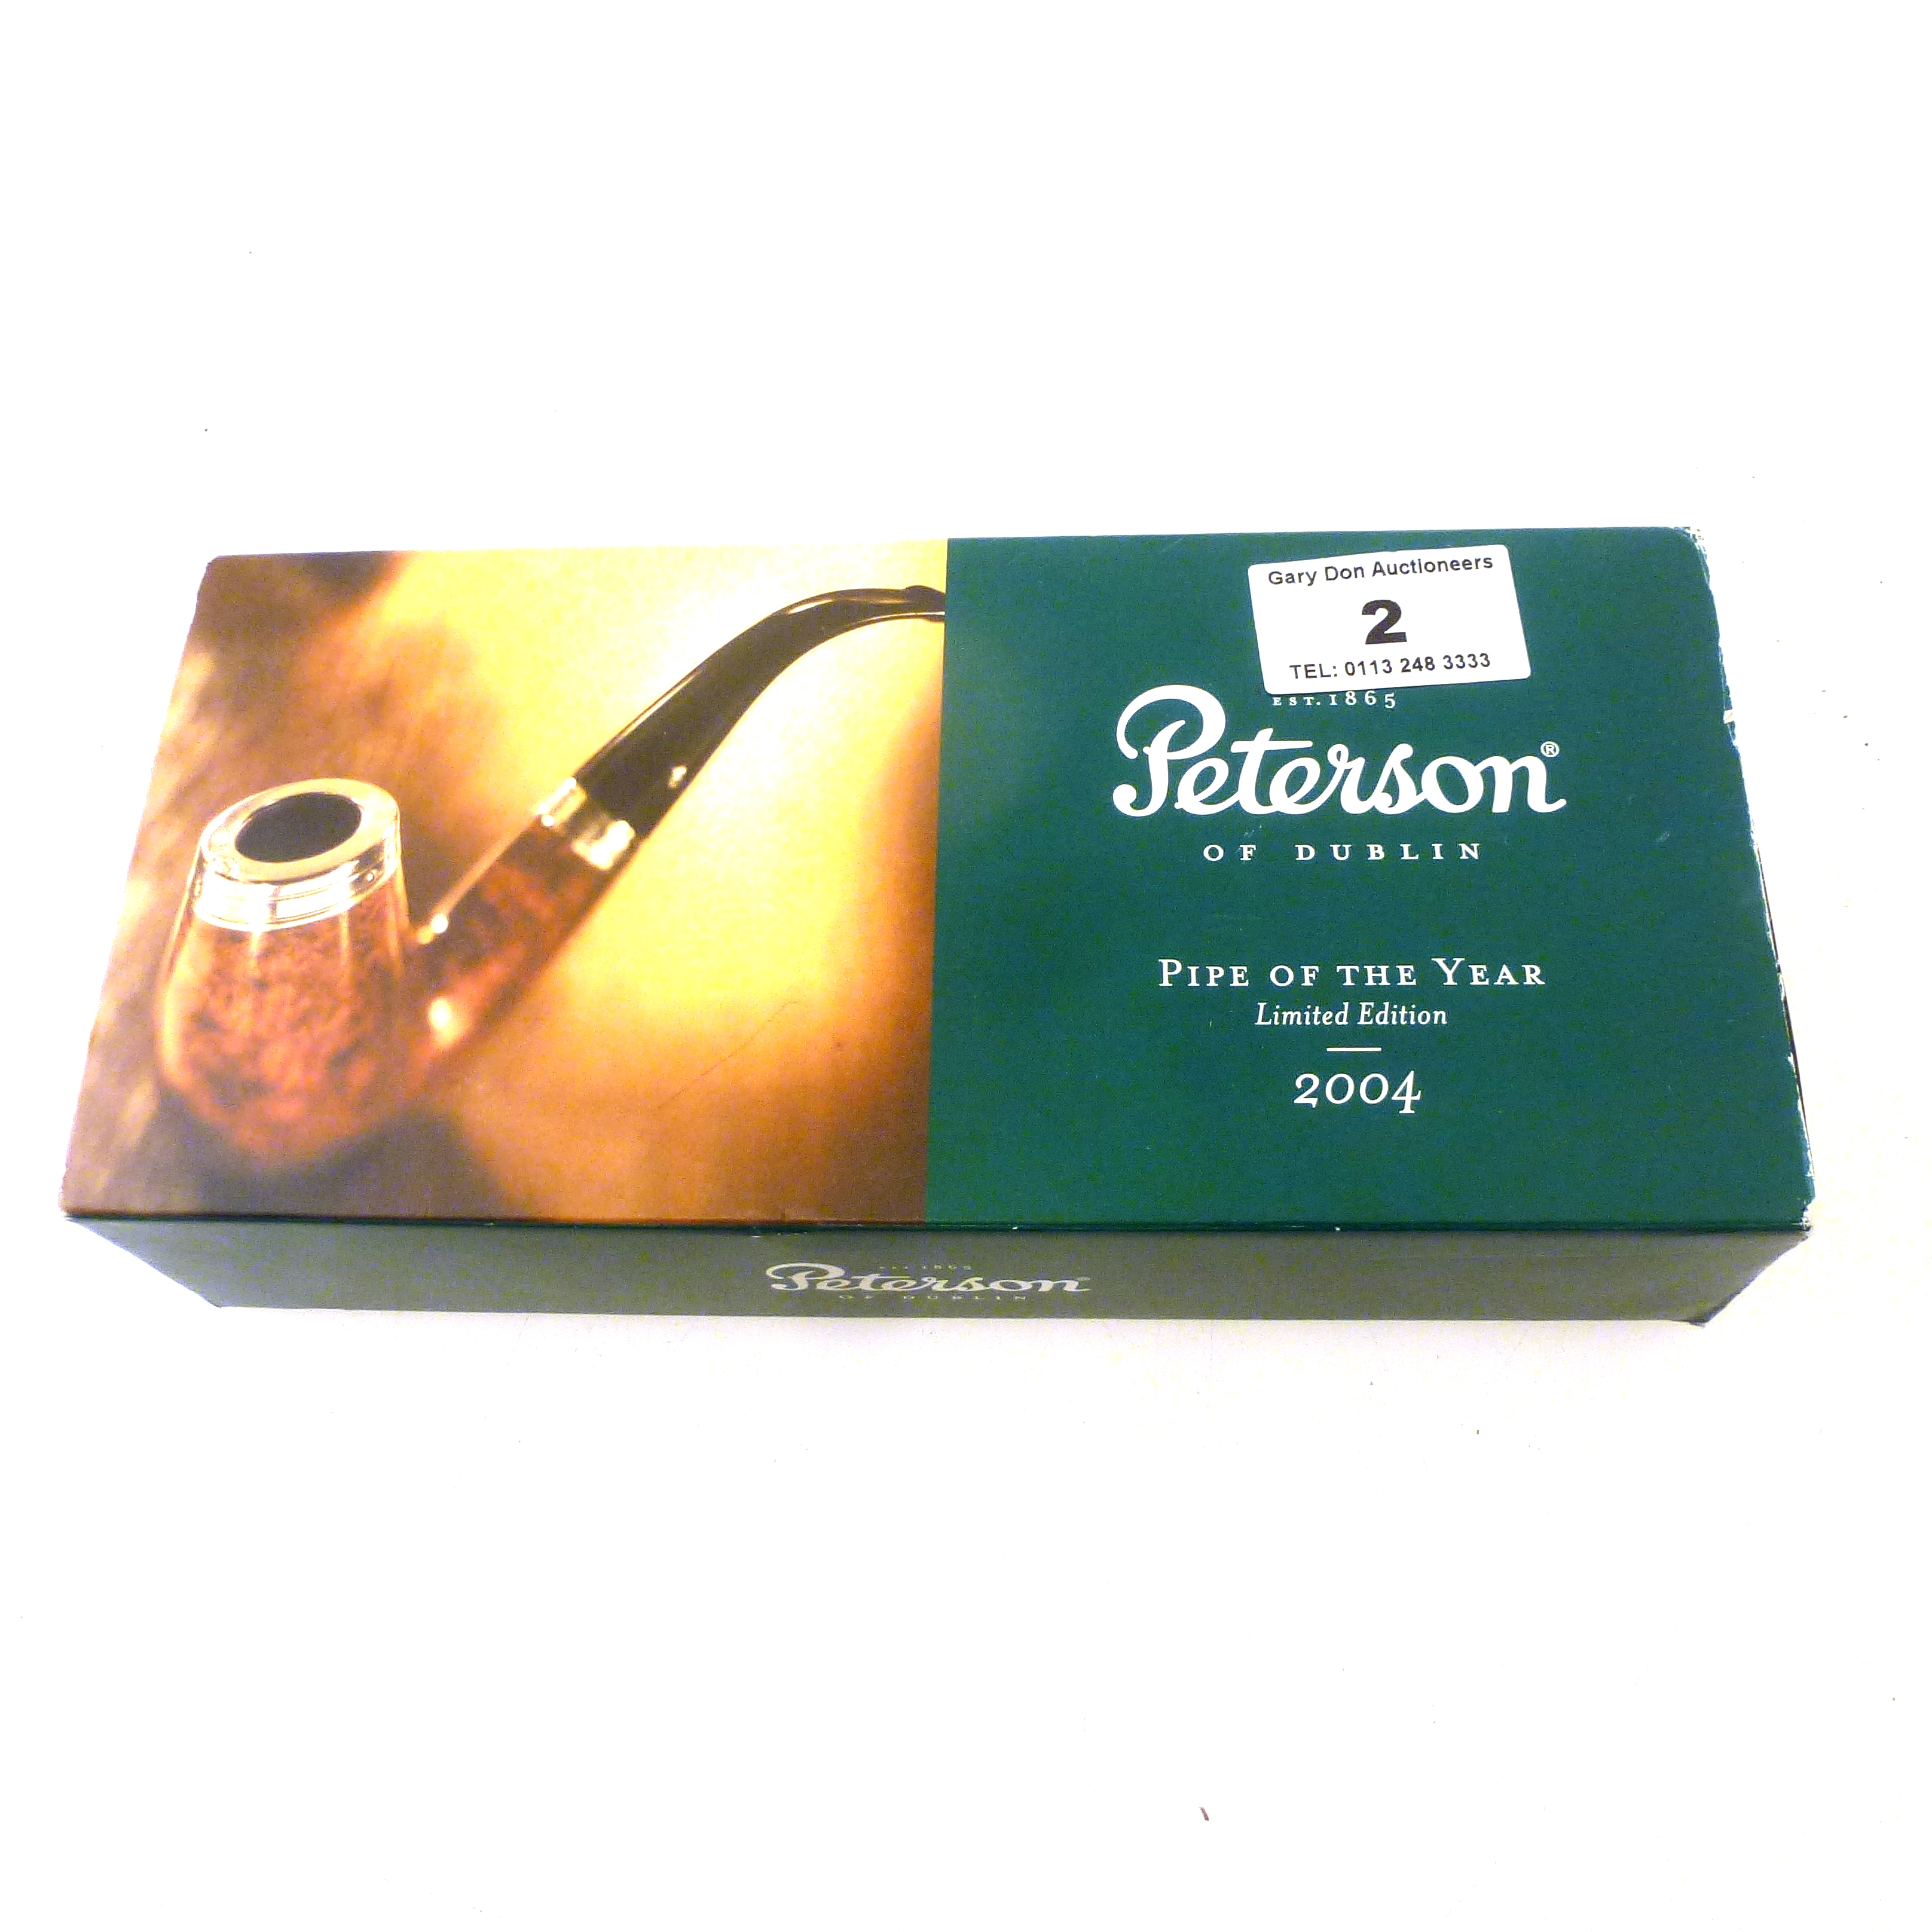 BOXED PETERSON PIPE OF THE YEAR LIMITED EDITION 2004 PIPE 321/1000 WITH SILVER RIMS